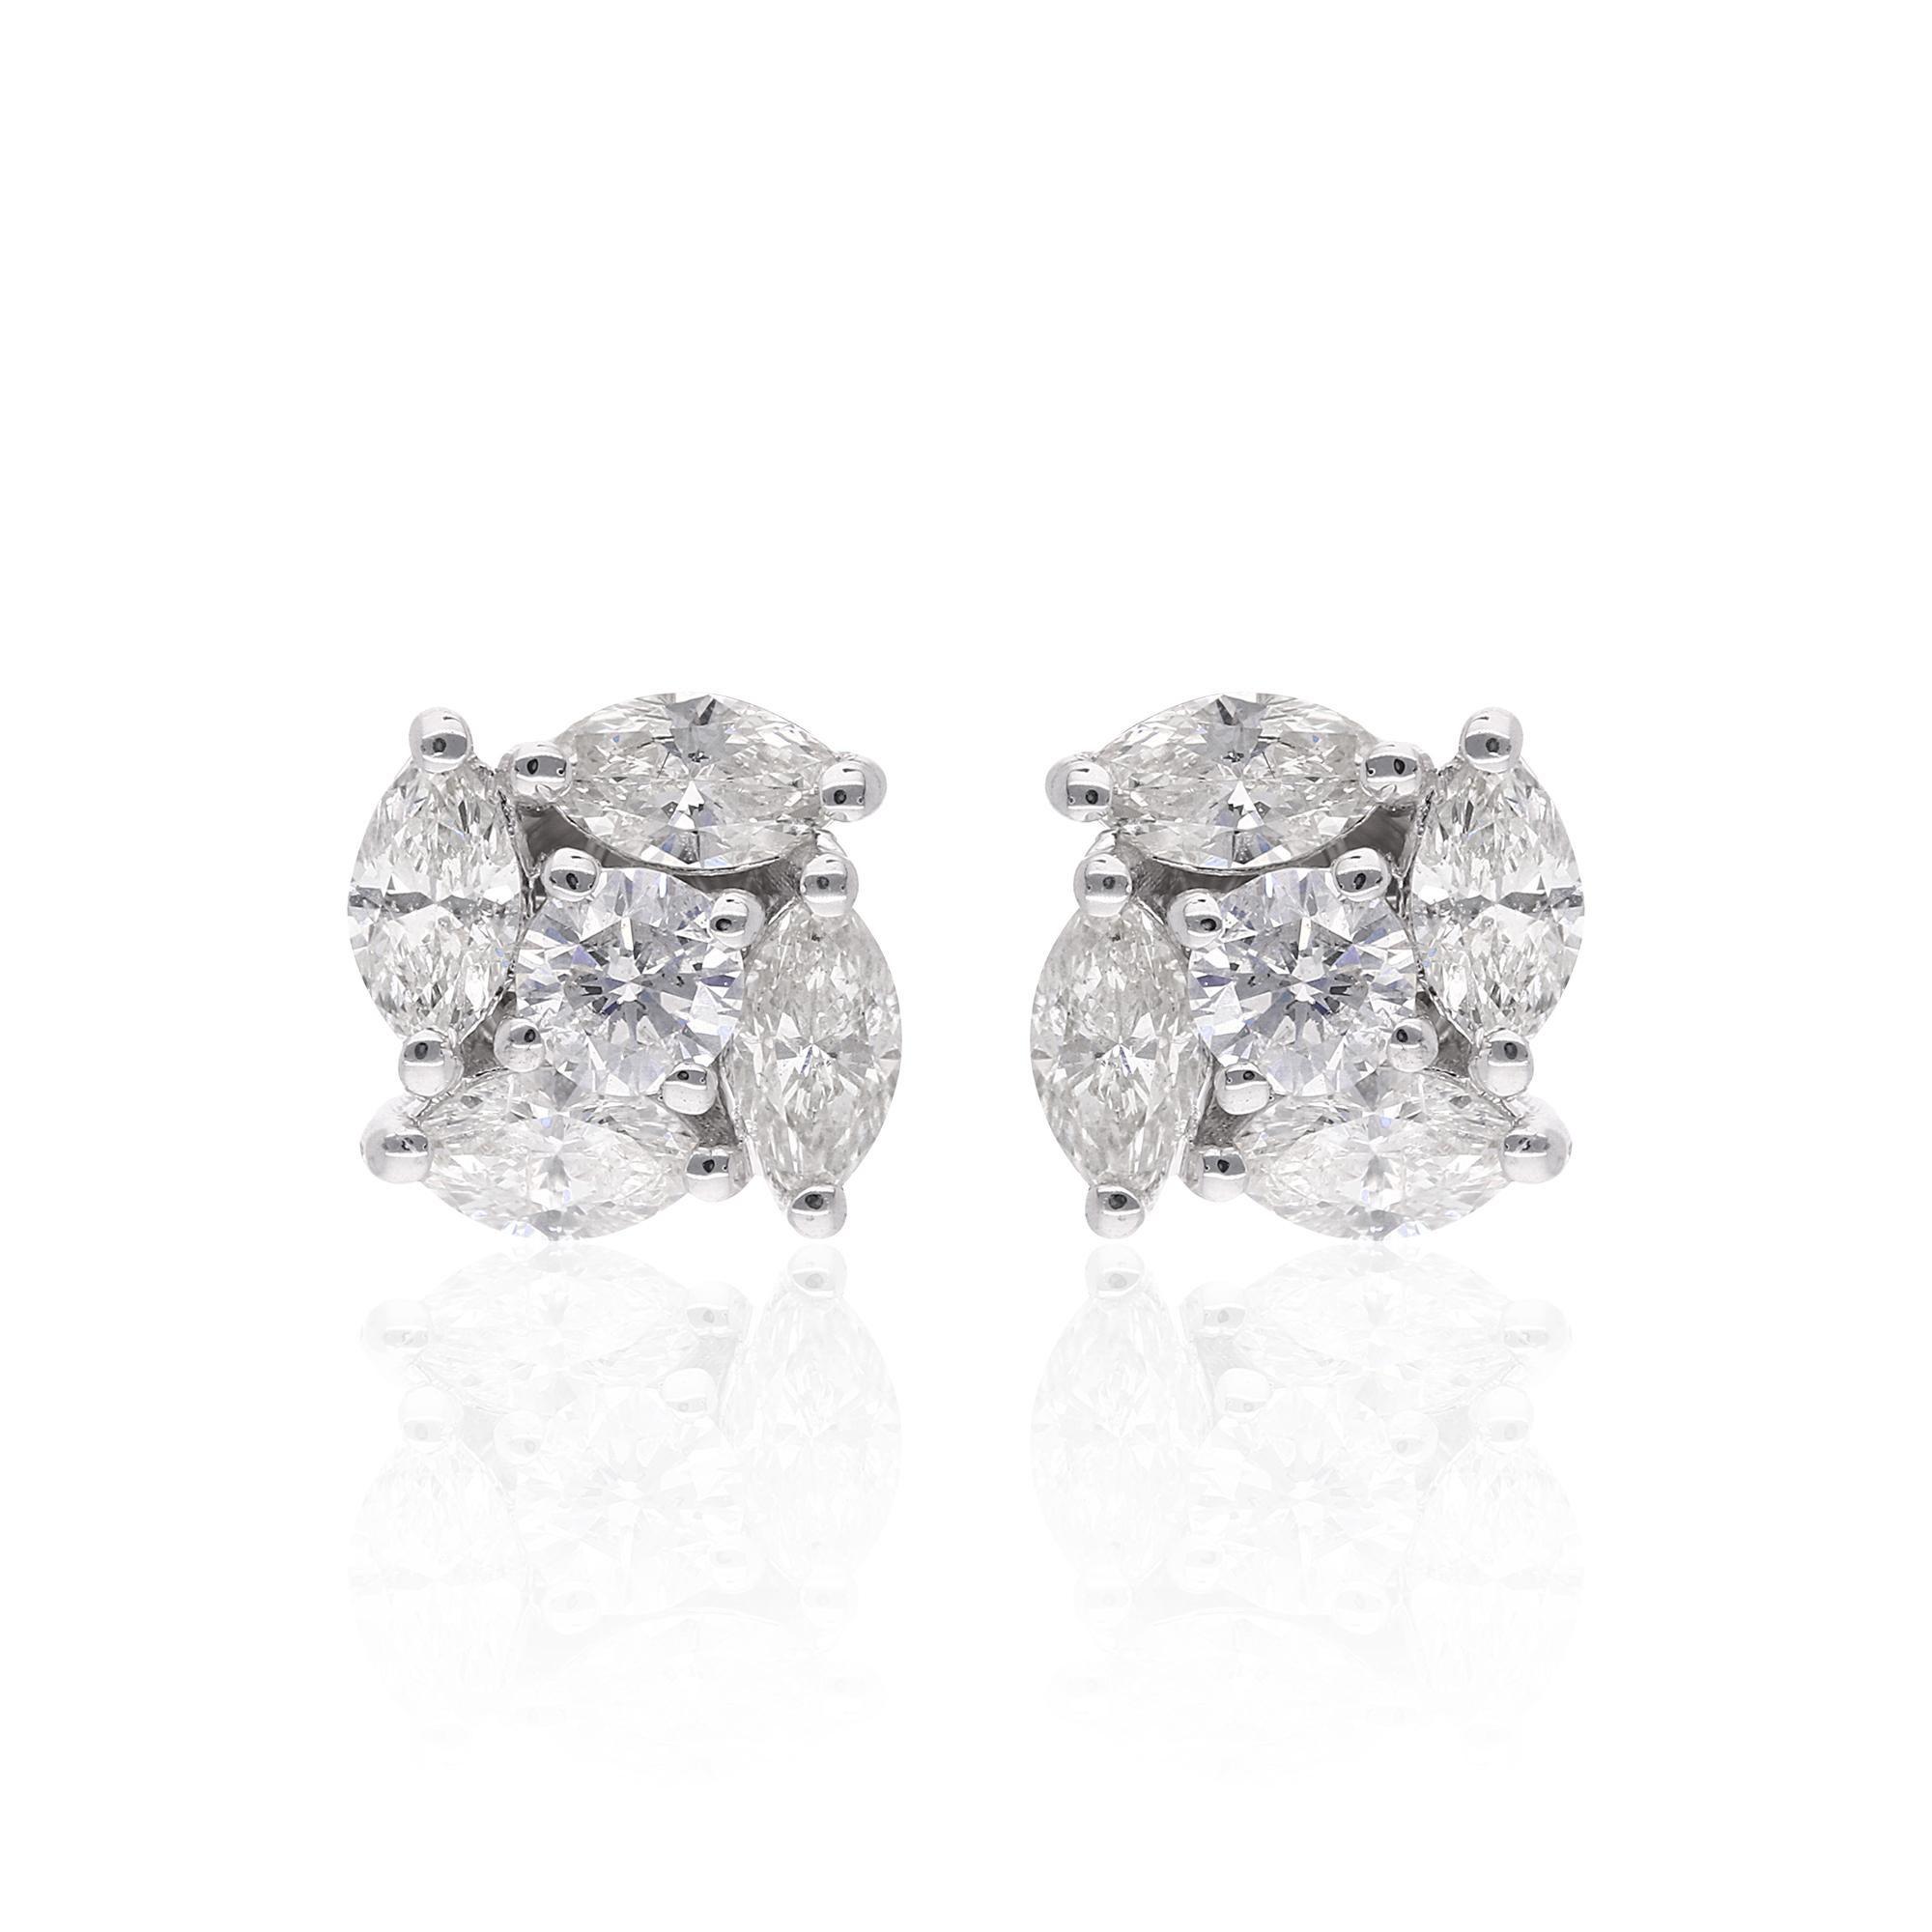 Elevate your style with these exquisite Diamond Stud Earrings featuring a stunning cluster setting. These earrings are available in 10k/14k/18k, Rose Gold/Yellow Gold/White Gold.

These are perfect Gift for Mom, Fiancée, Daughter, Wife and